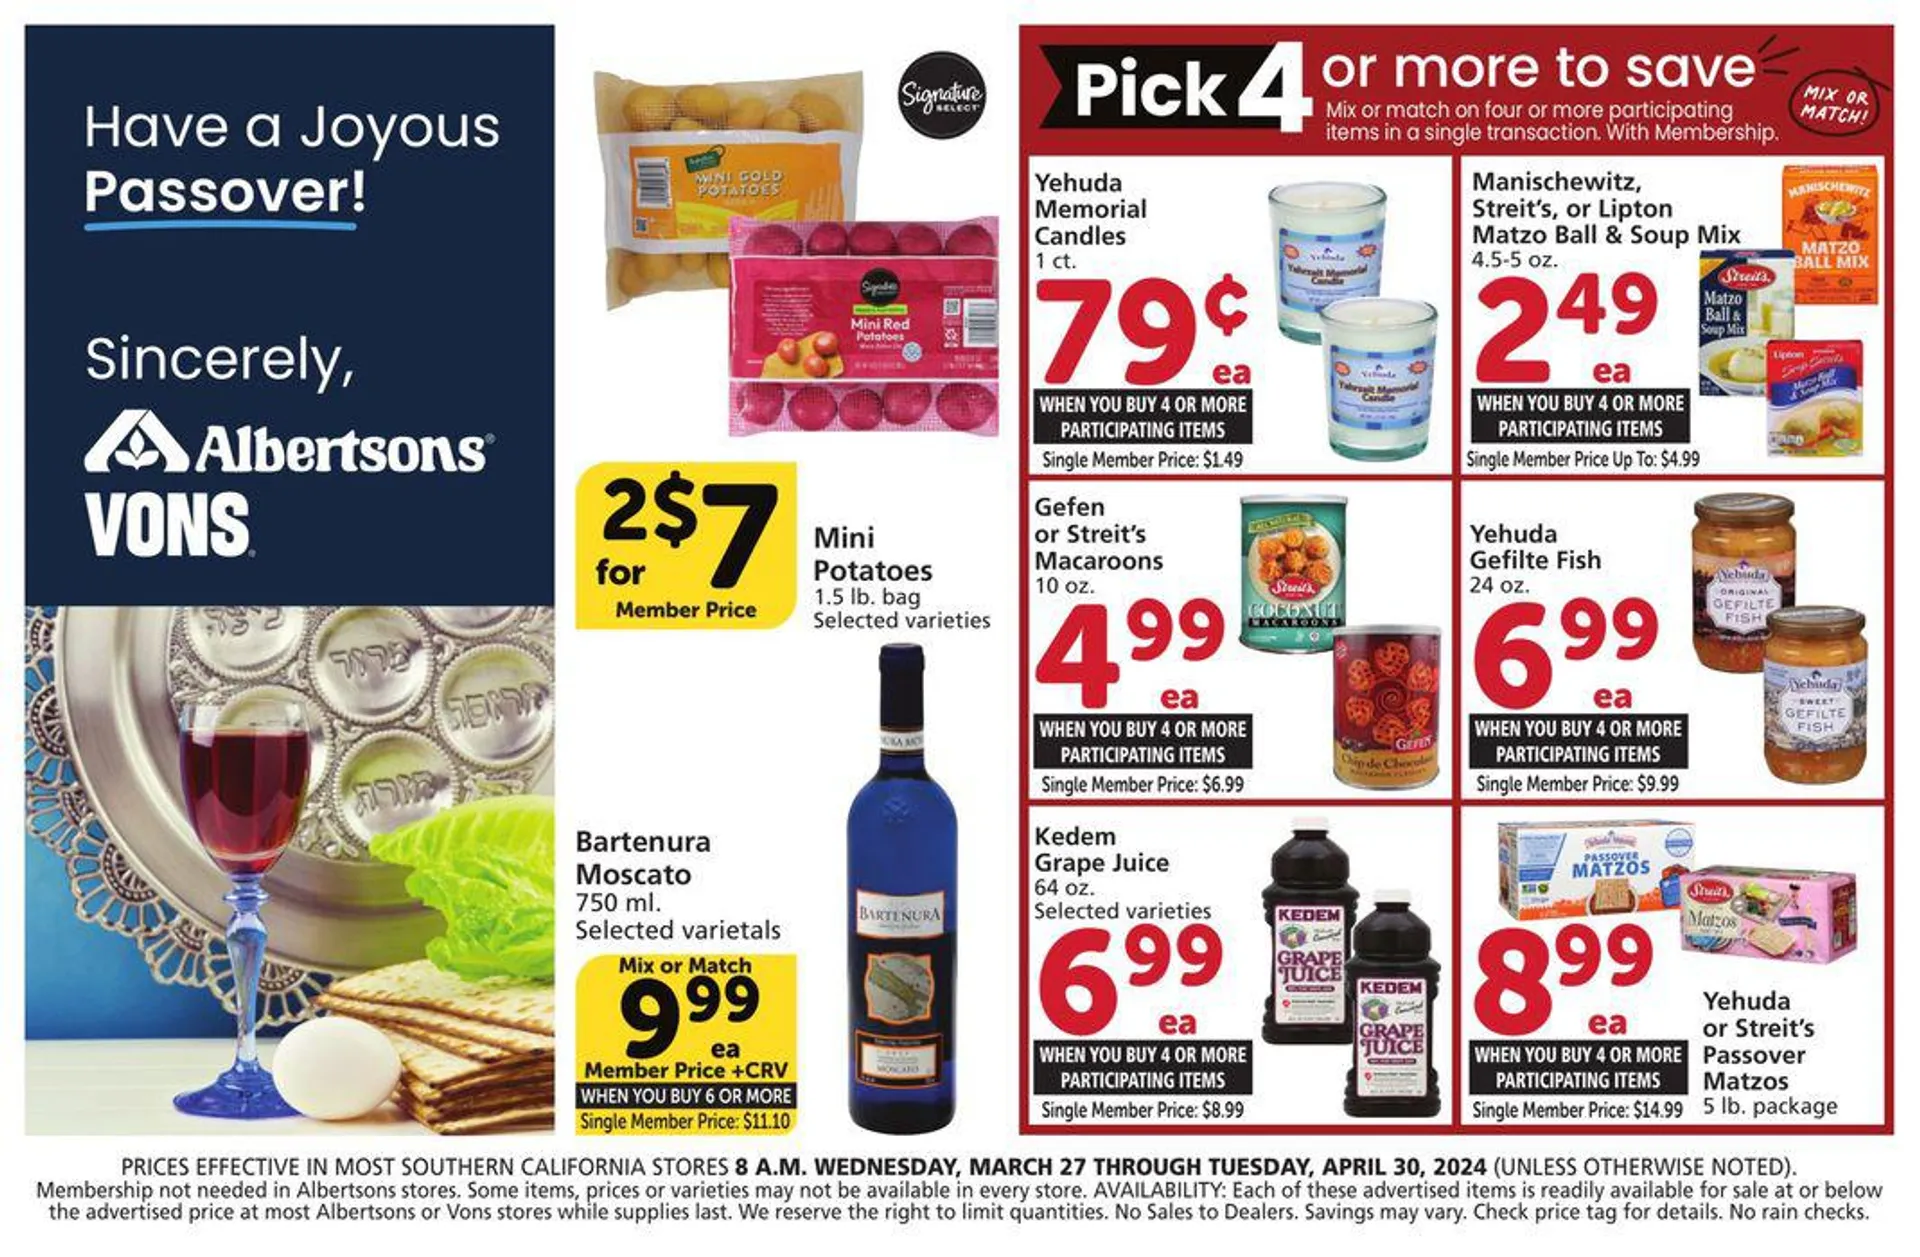 Weekly ad Albertsons - SoCal - SP from April 8 to April 30 2024 - Page 1